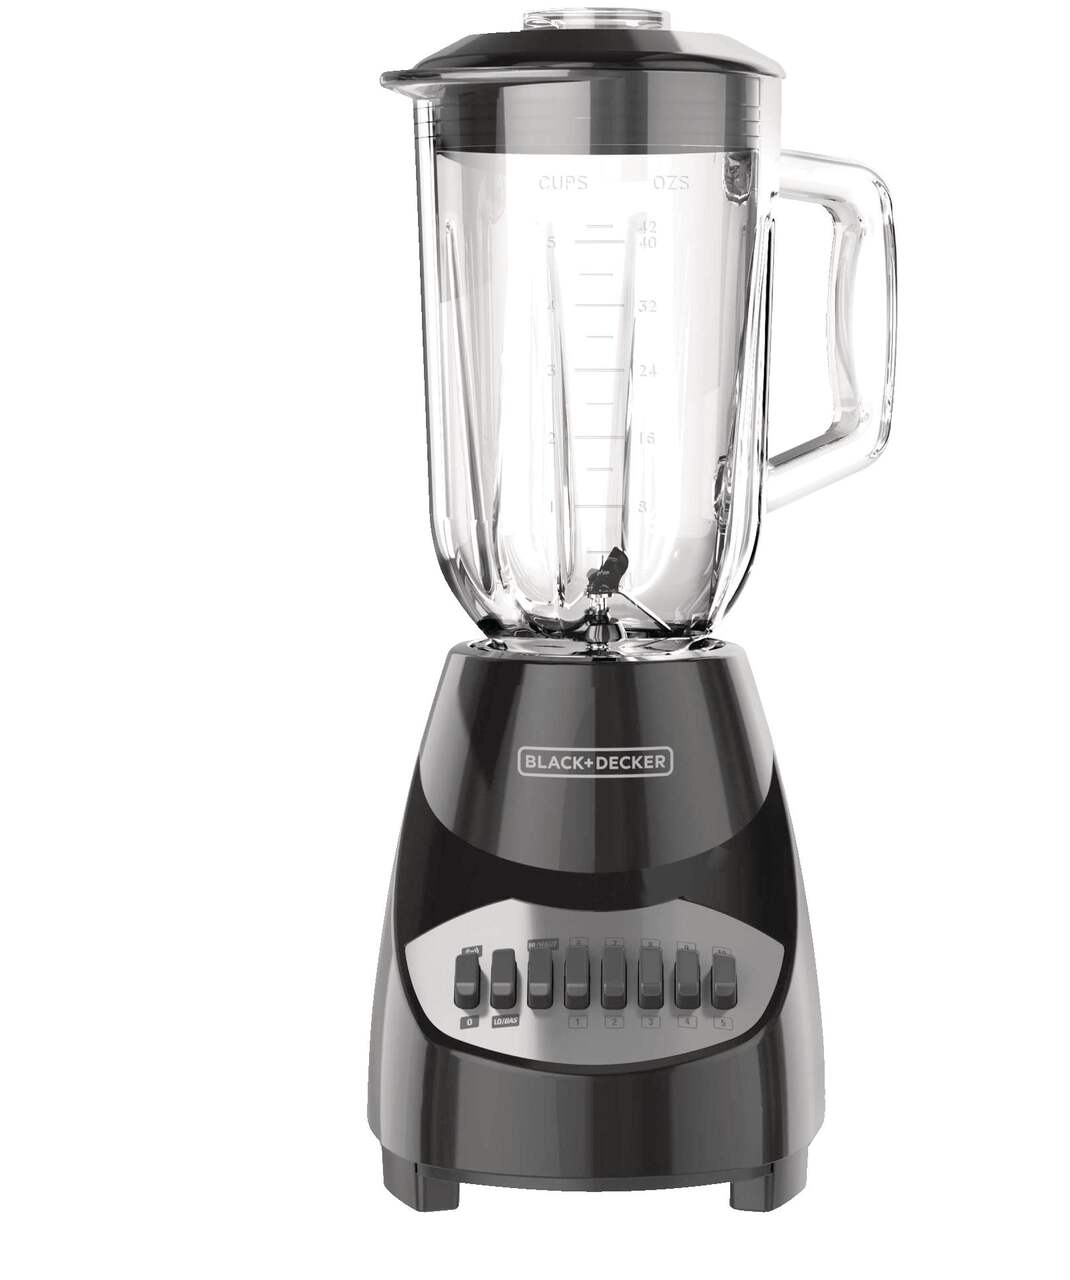 https://media-www.canadiantire.ca/product/living/kitchen/kitchen-appliances/0432192/b-d-10-speed-blender-550w-42oz-glass-e795466d-42cf-412a-bcf5-15306d41b811-jpgrendition.jpg?imdensity=1&imwidth=1244&impolicy=mZoom